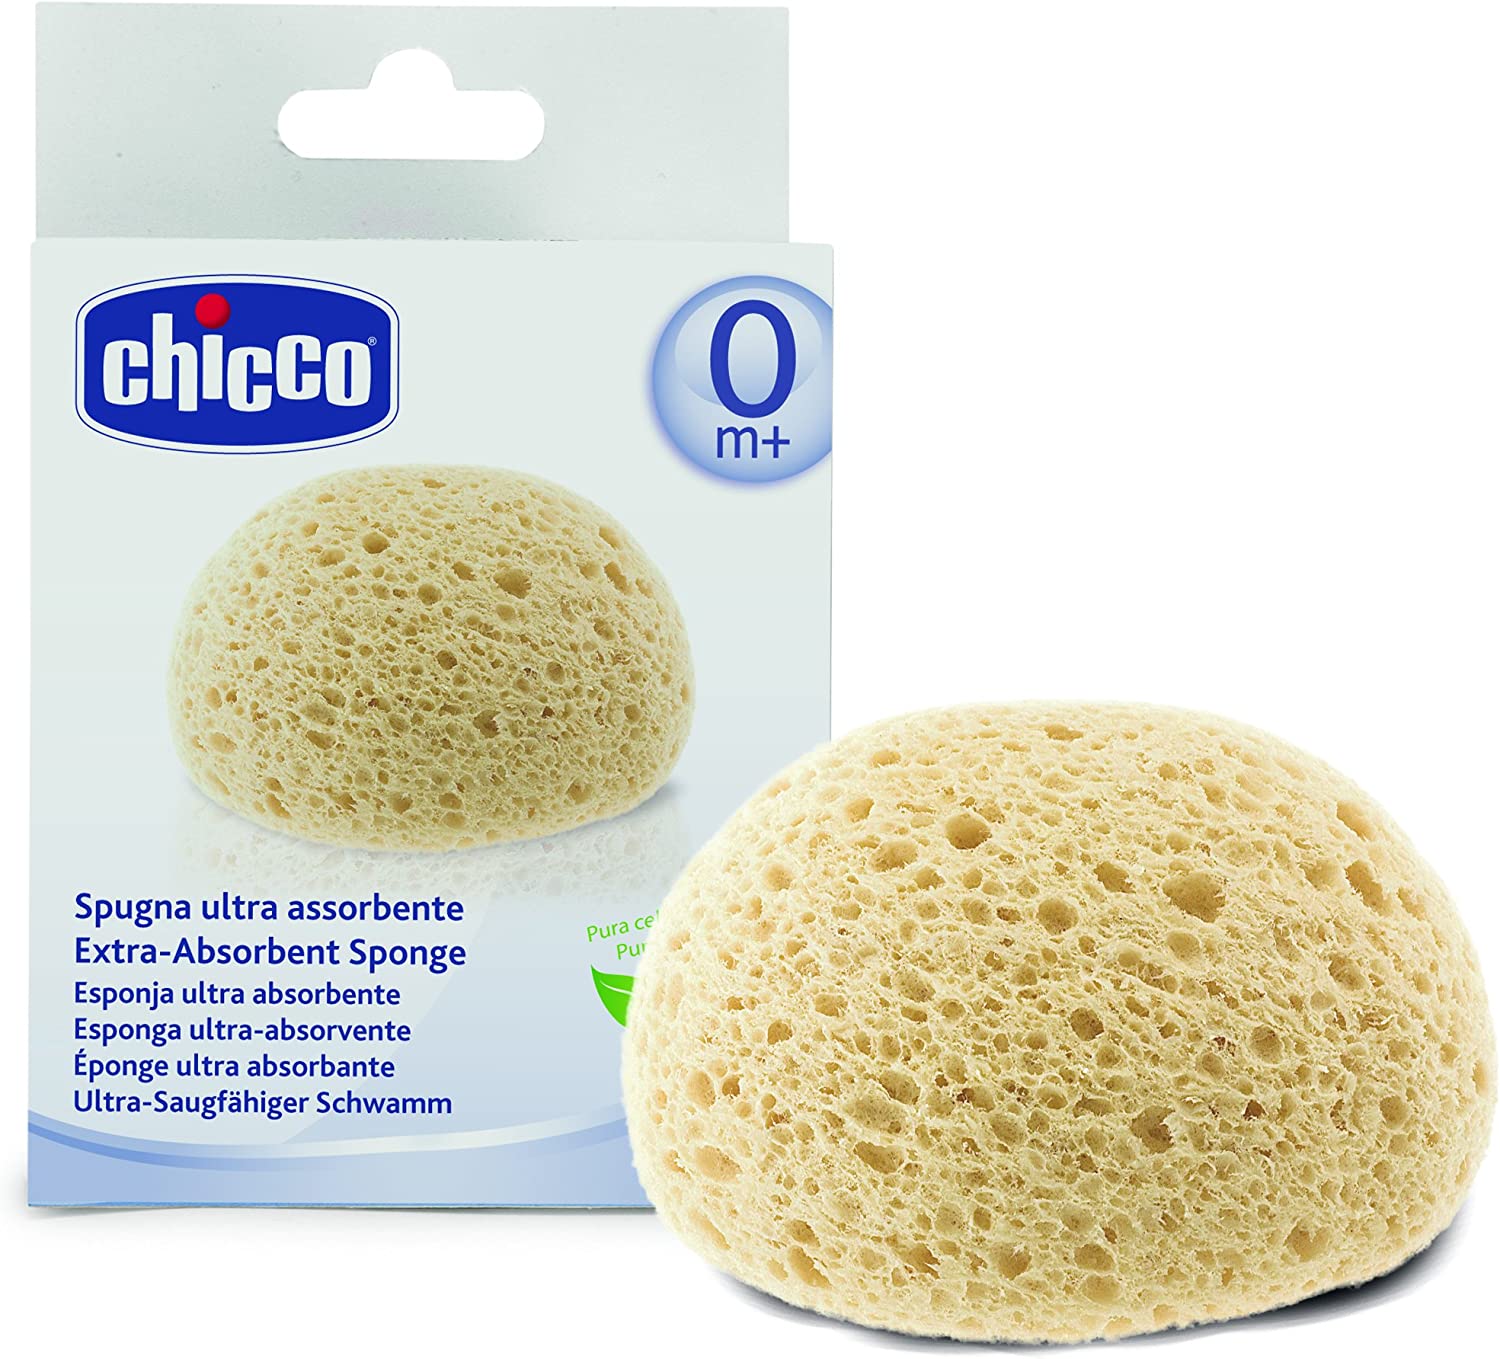 Chicco Sponge Ultra Absorbent in Pure Natural Cellulose